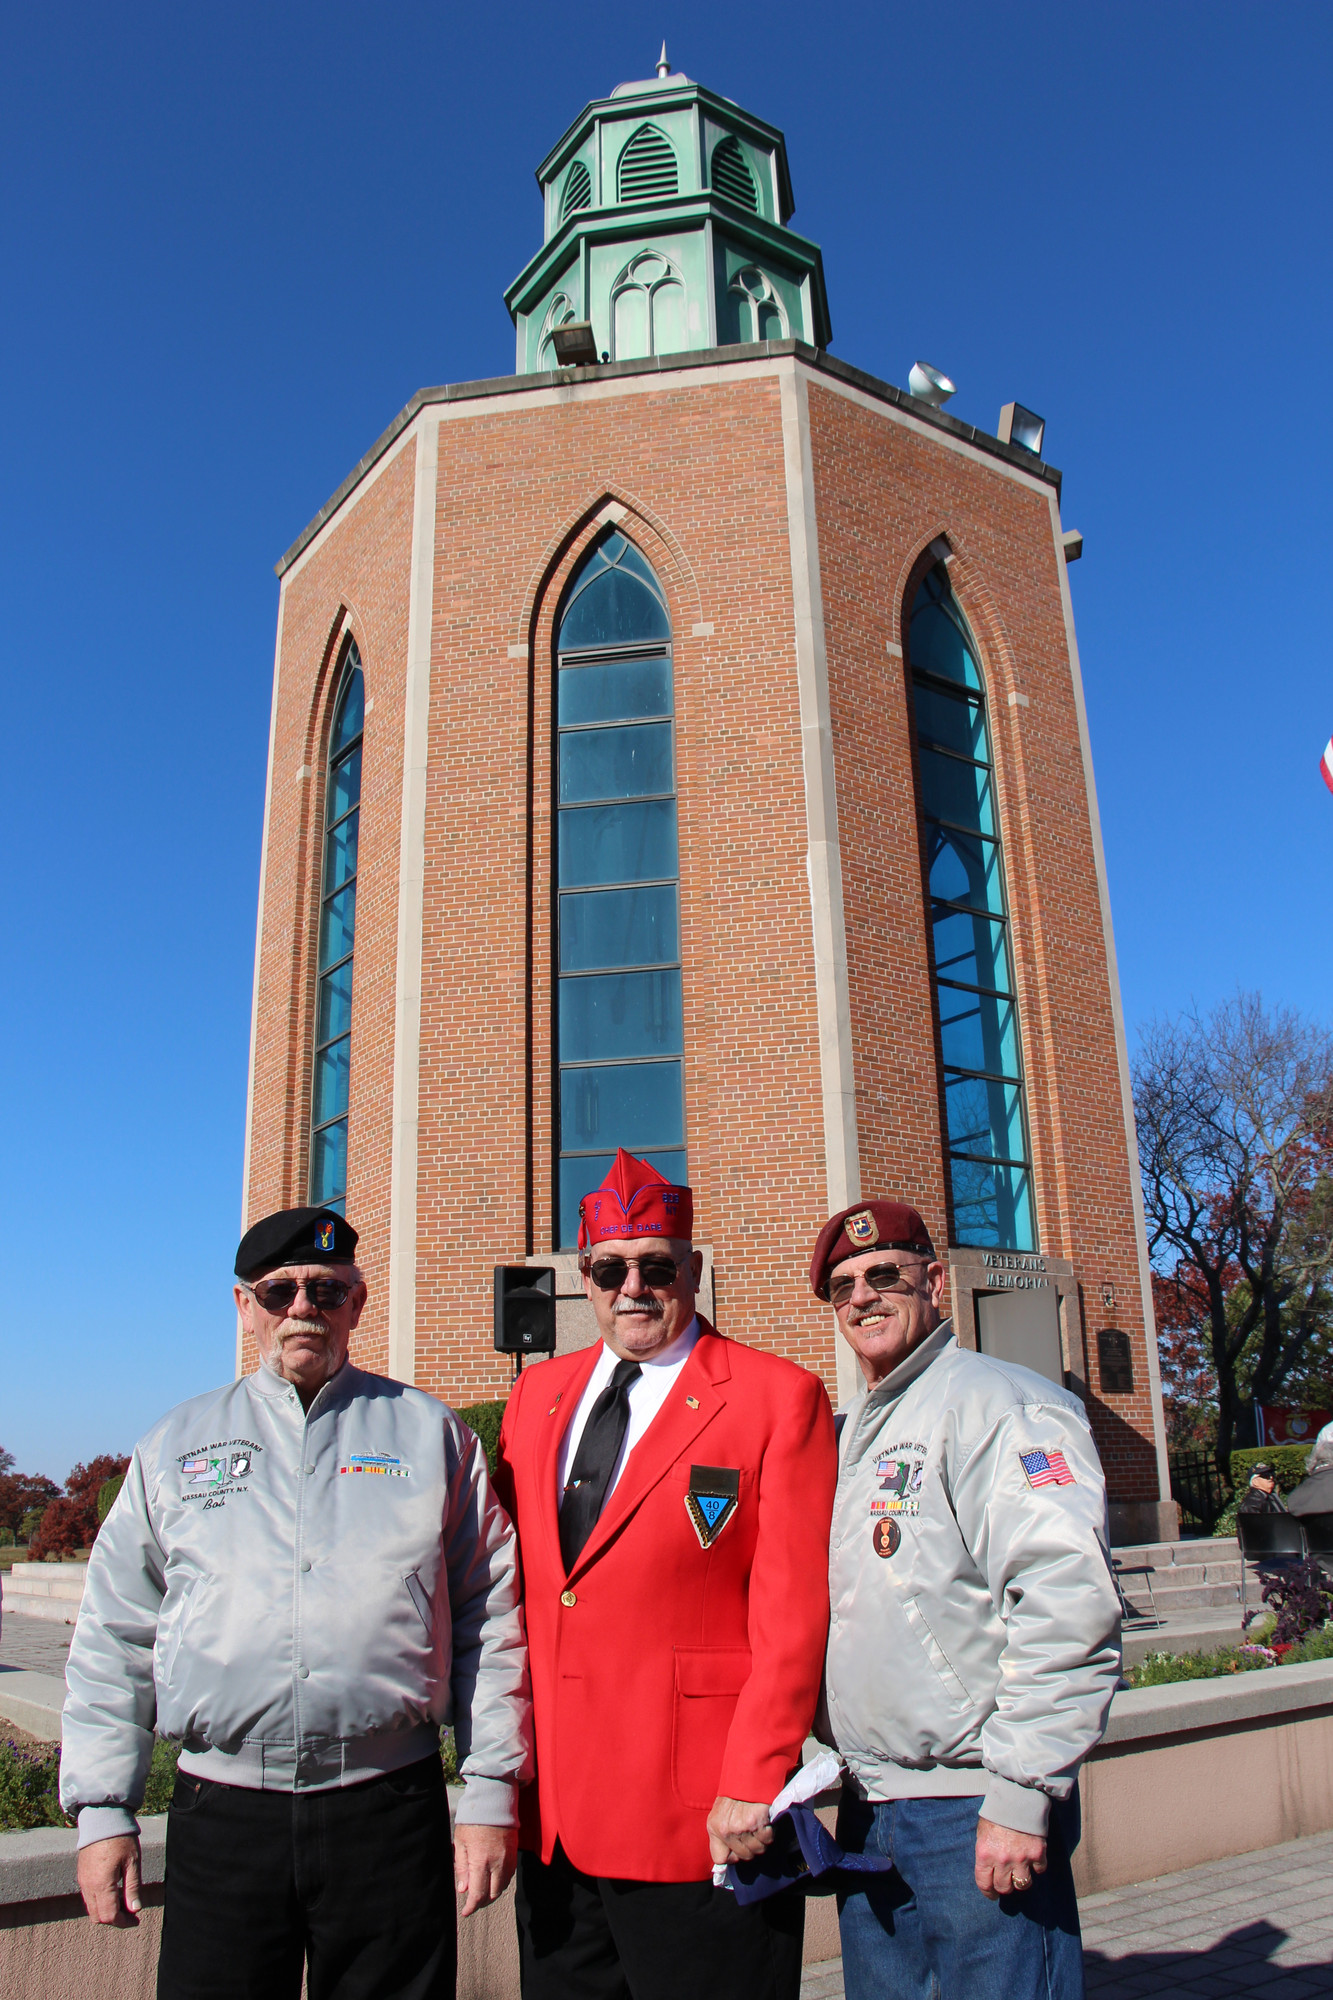 Pat Yngstrom, of Merrick, Kevin Lawlor, of East Rockaway, and Bob Reichel, also of Merrick, joined together in Veterans Memorial Plaza in Eisenhower Park on Sunday.